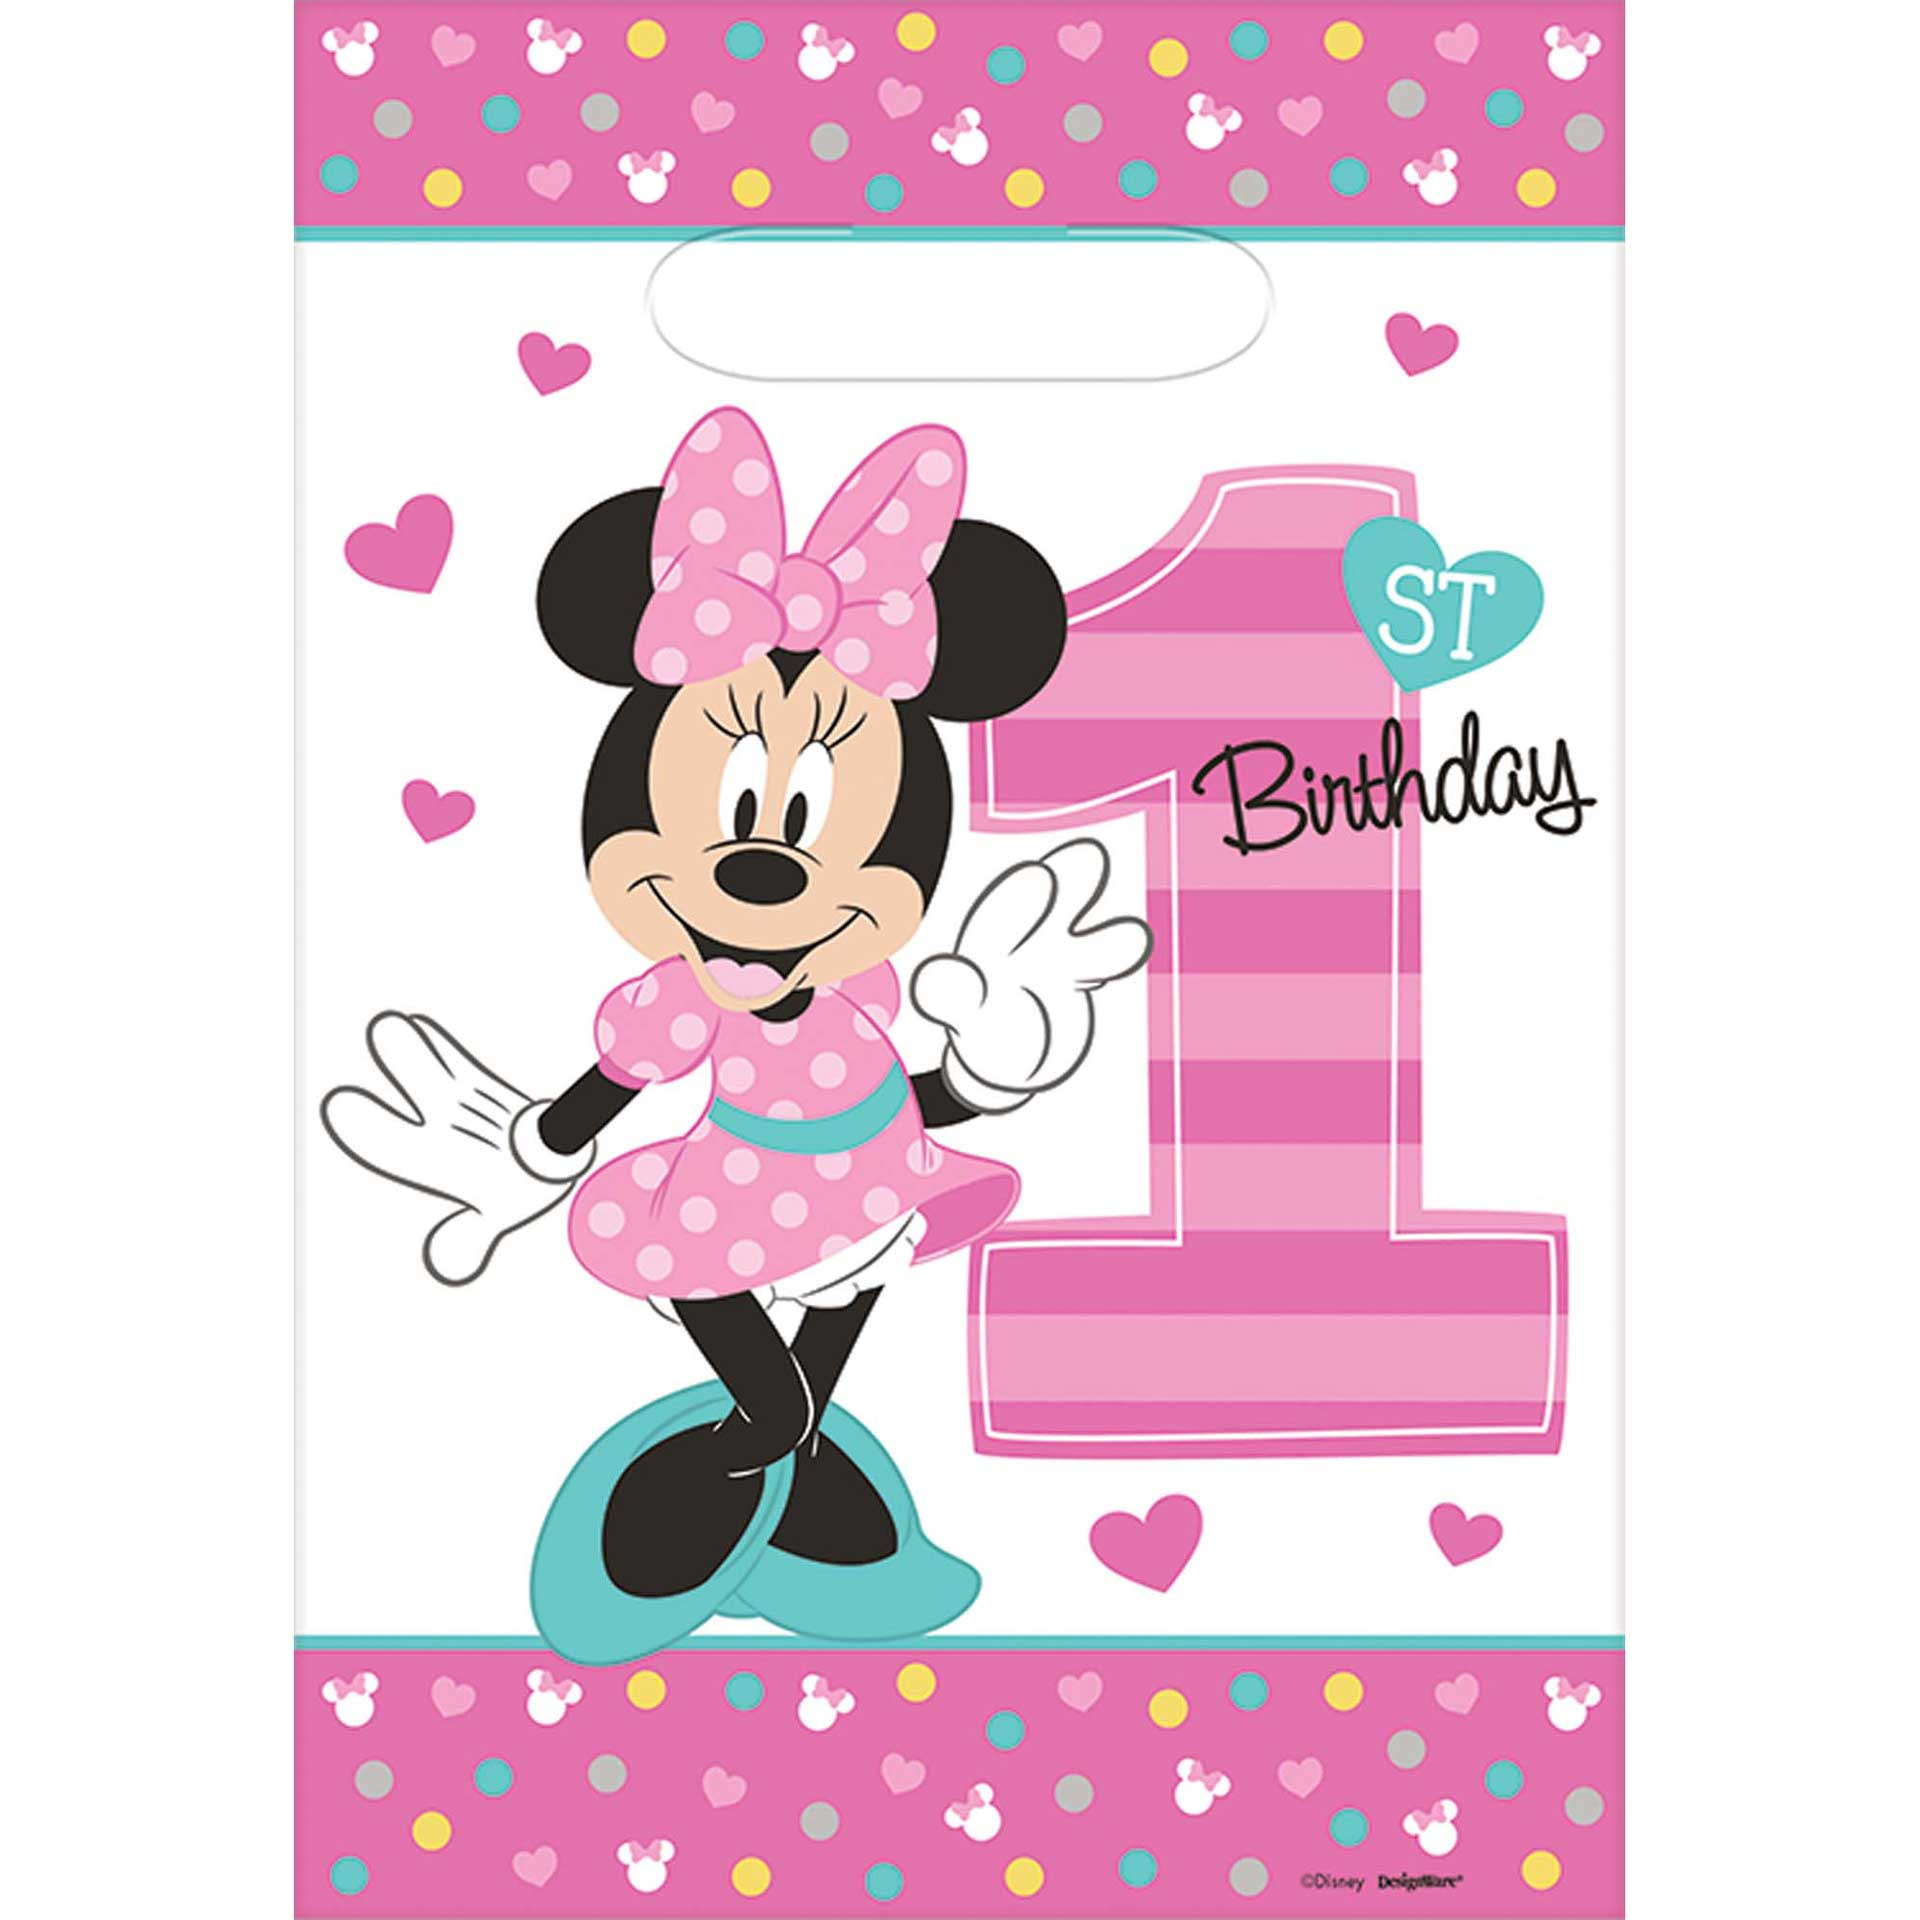 Minnie Mouse 1st Birthday Party Decorations
 Minnie Mouse 1st Birthday Party Supplies Theme Party Packs